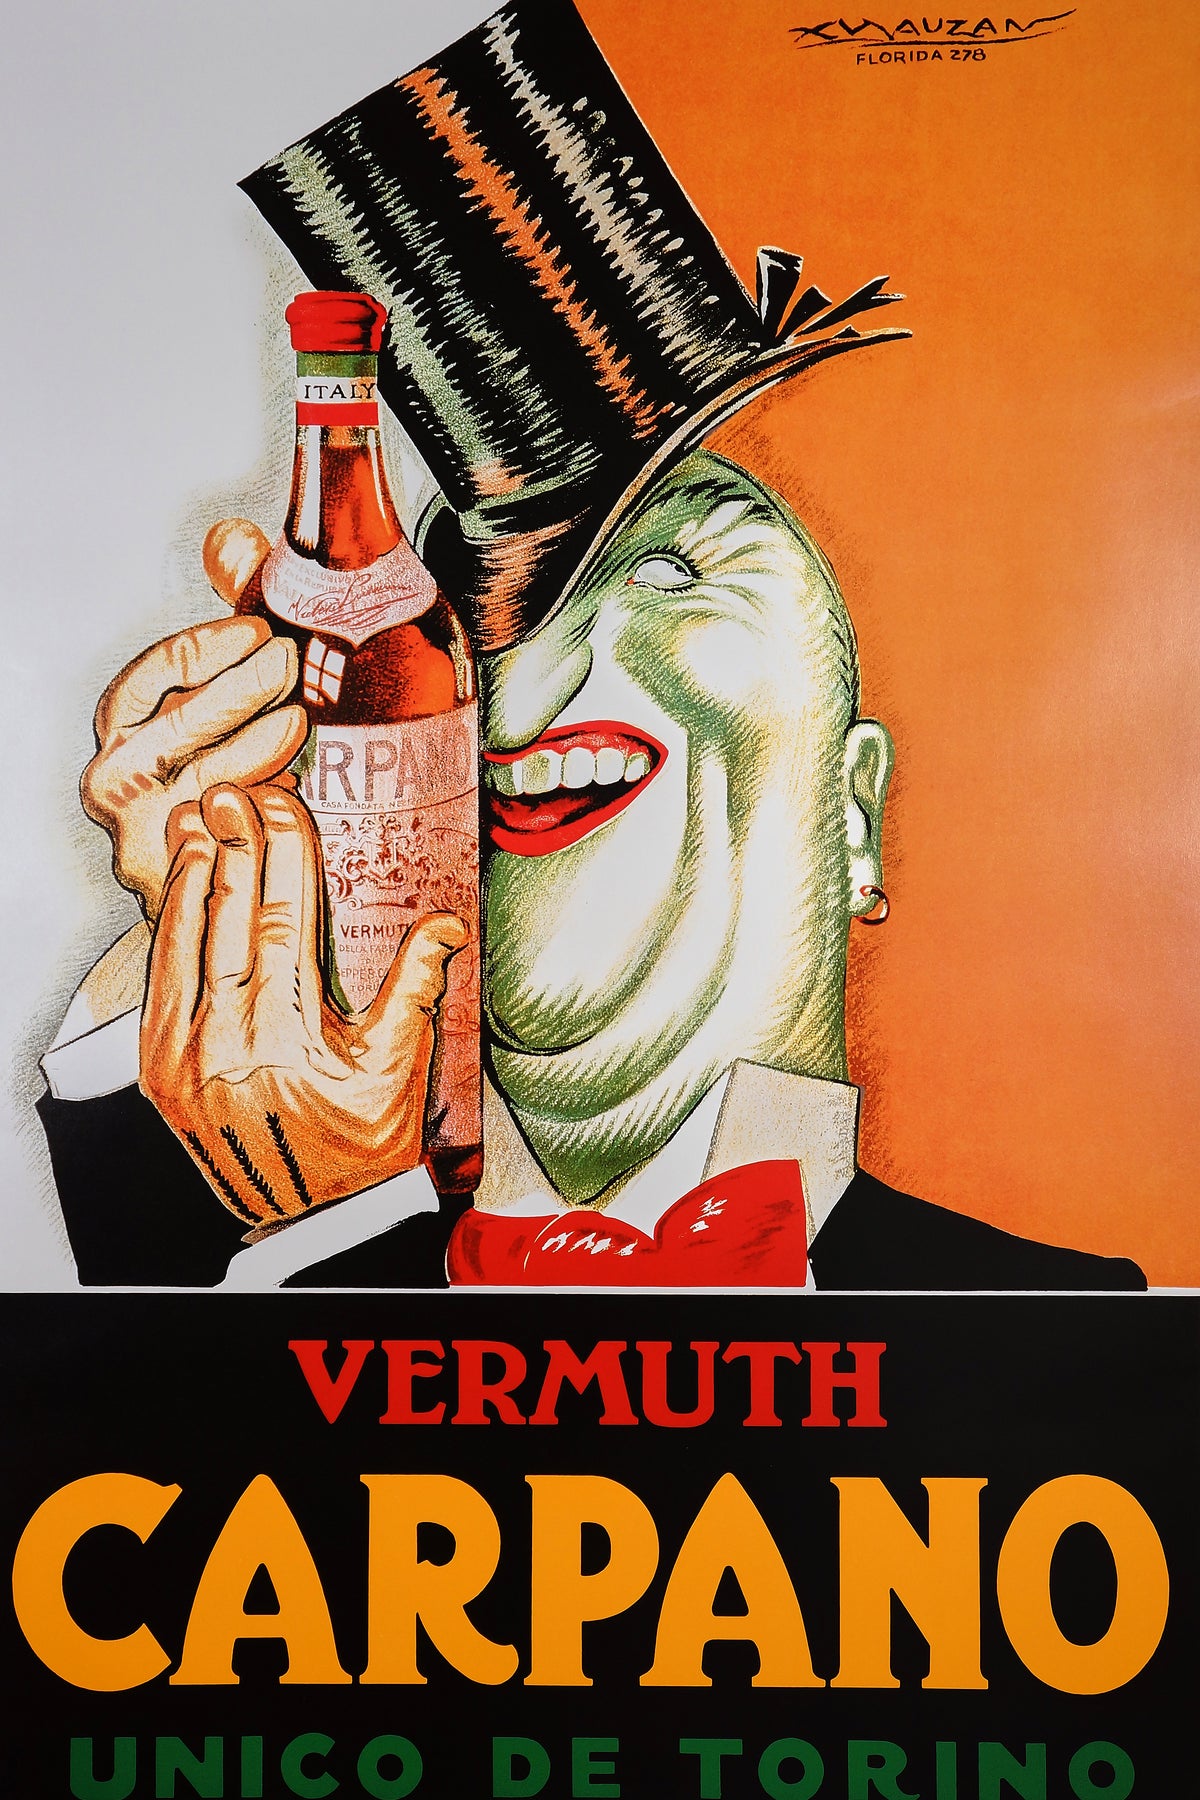 Vermuth Carpano - Authentic Vintage Poster